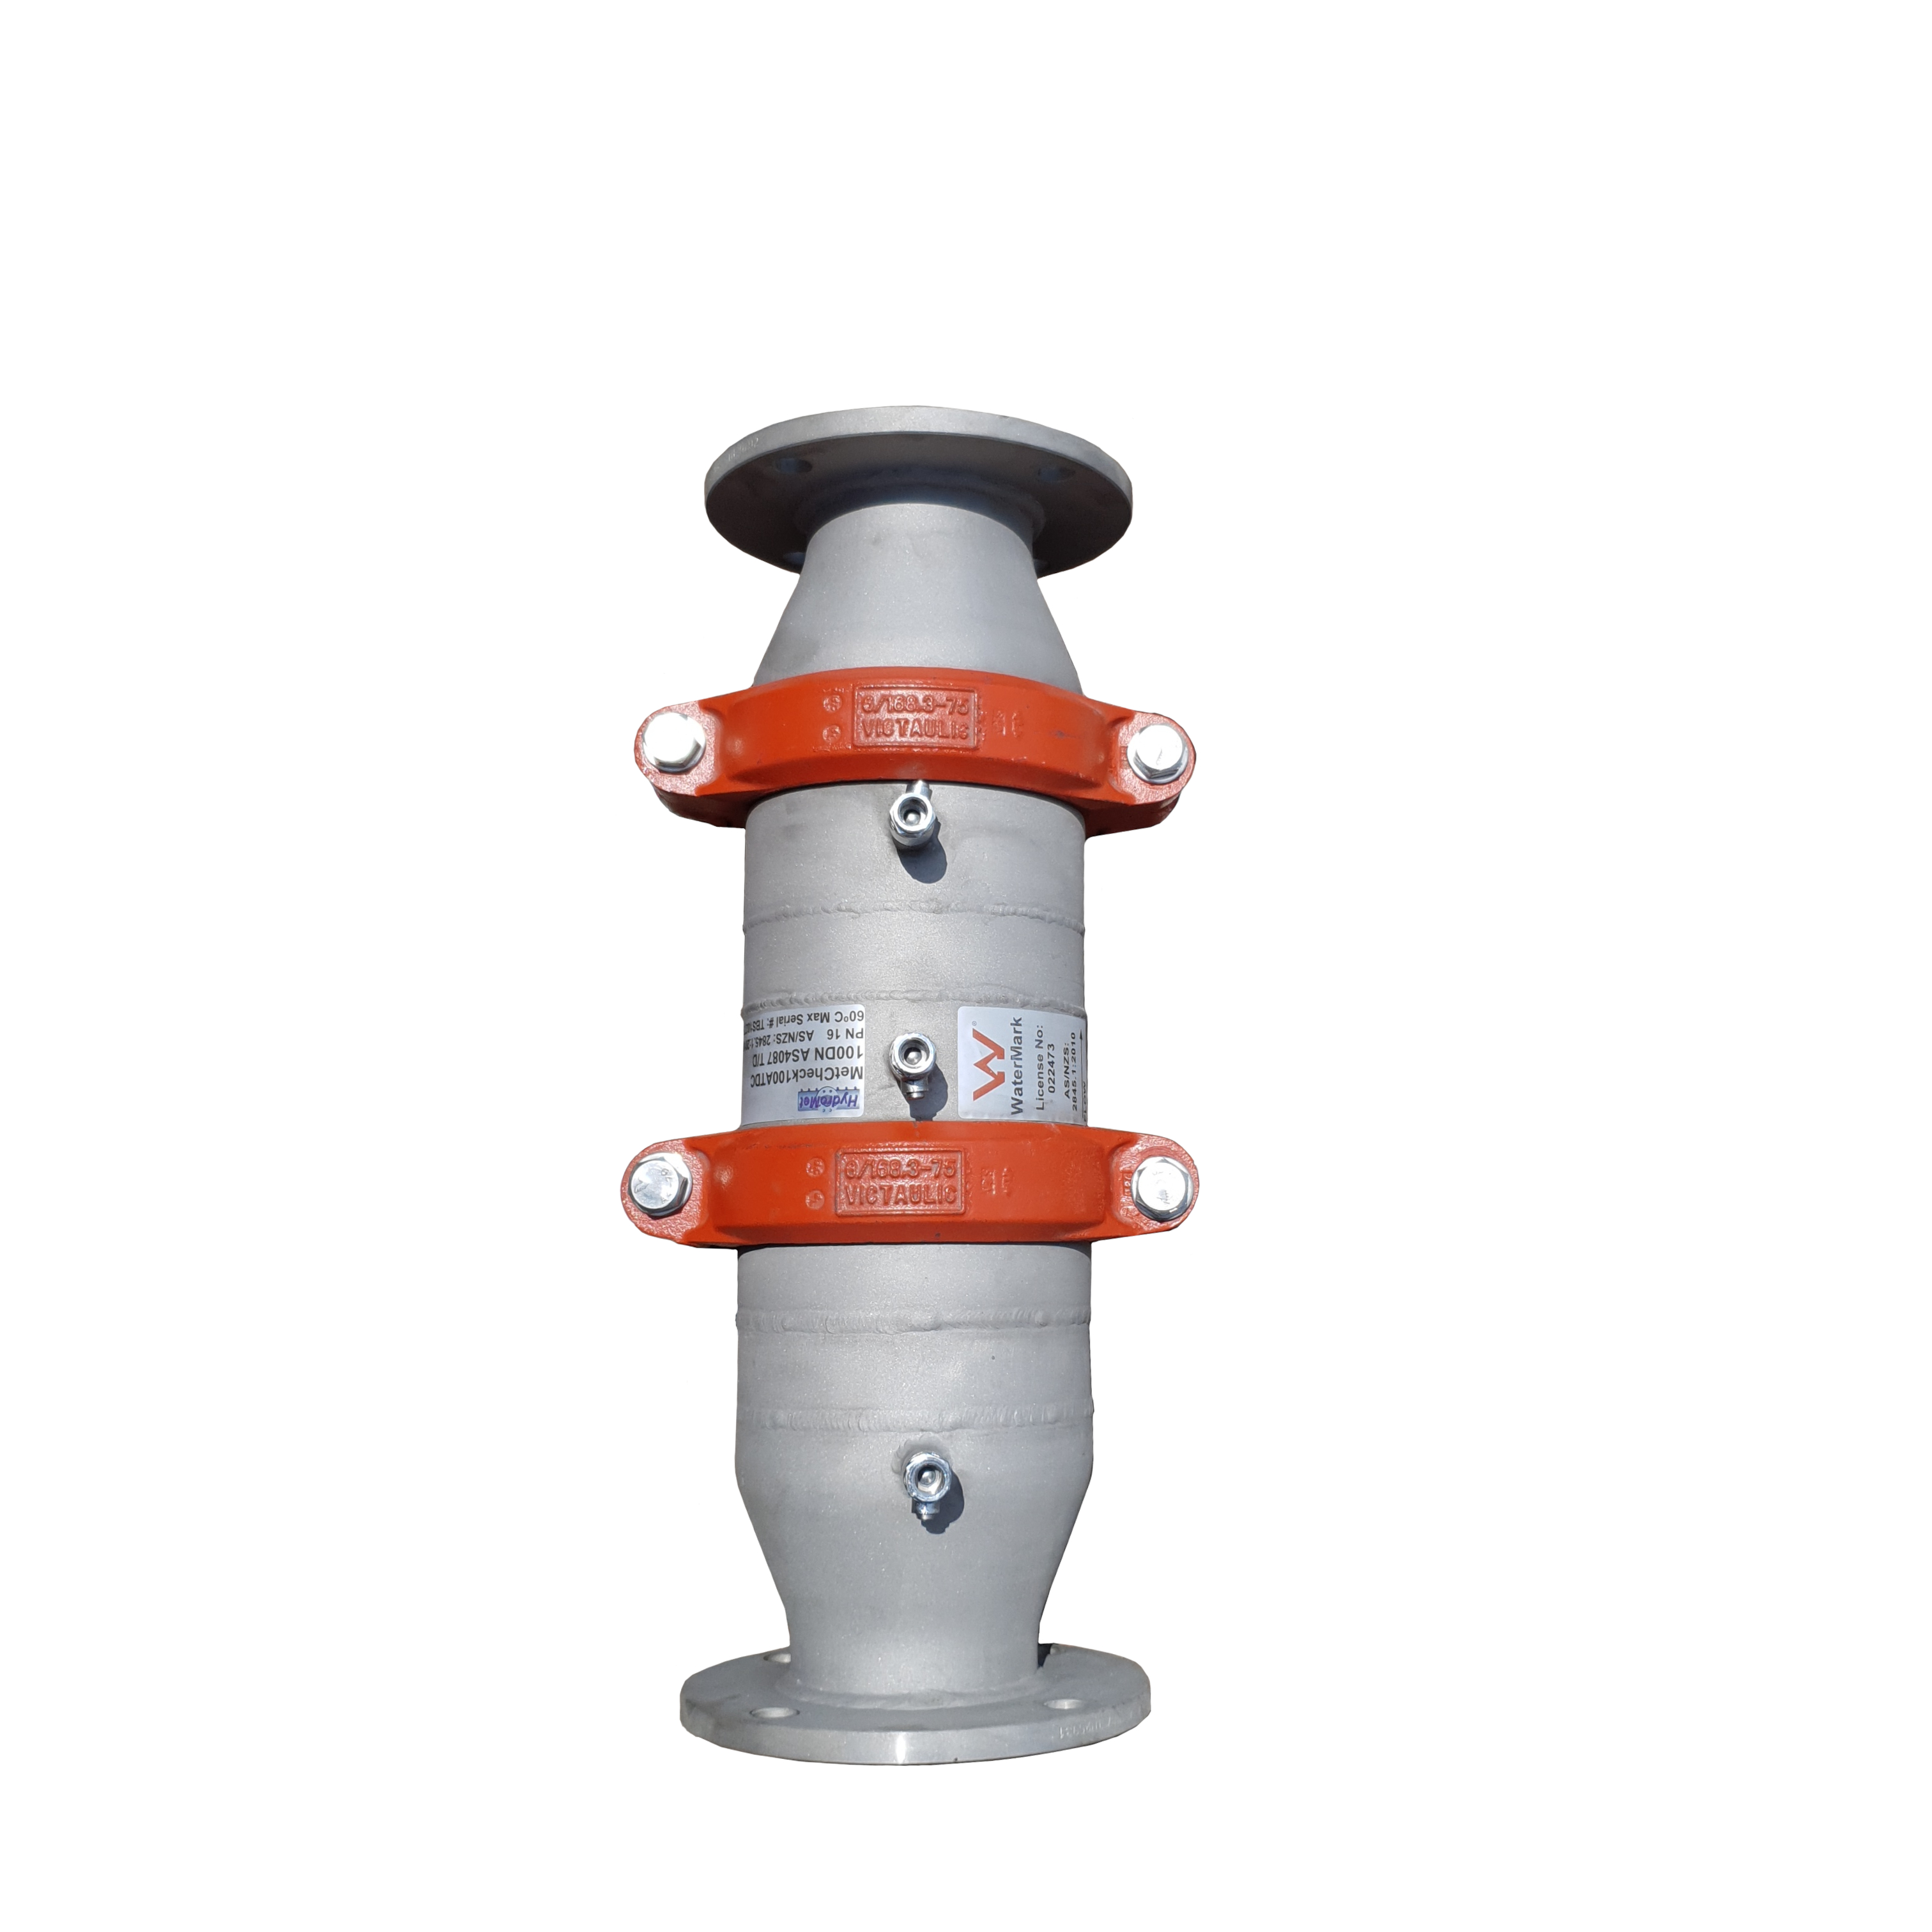 100mm MetCheck double check backflow prevention device. Built from 316 Stainless steel